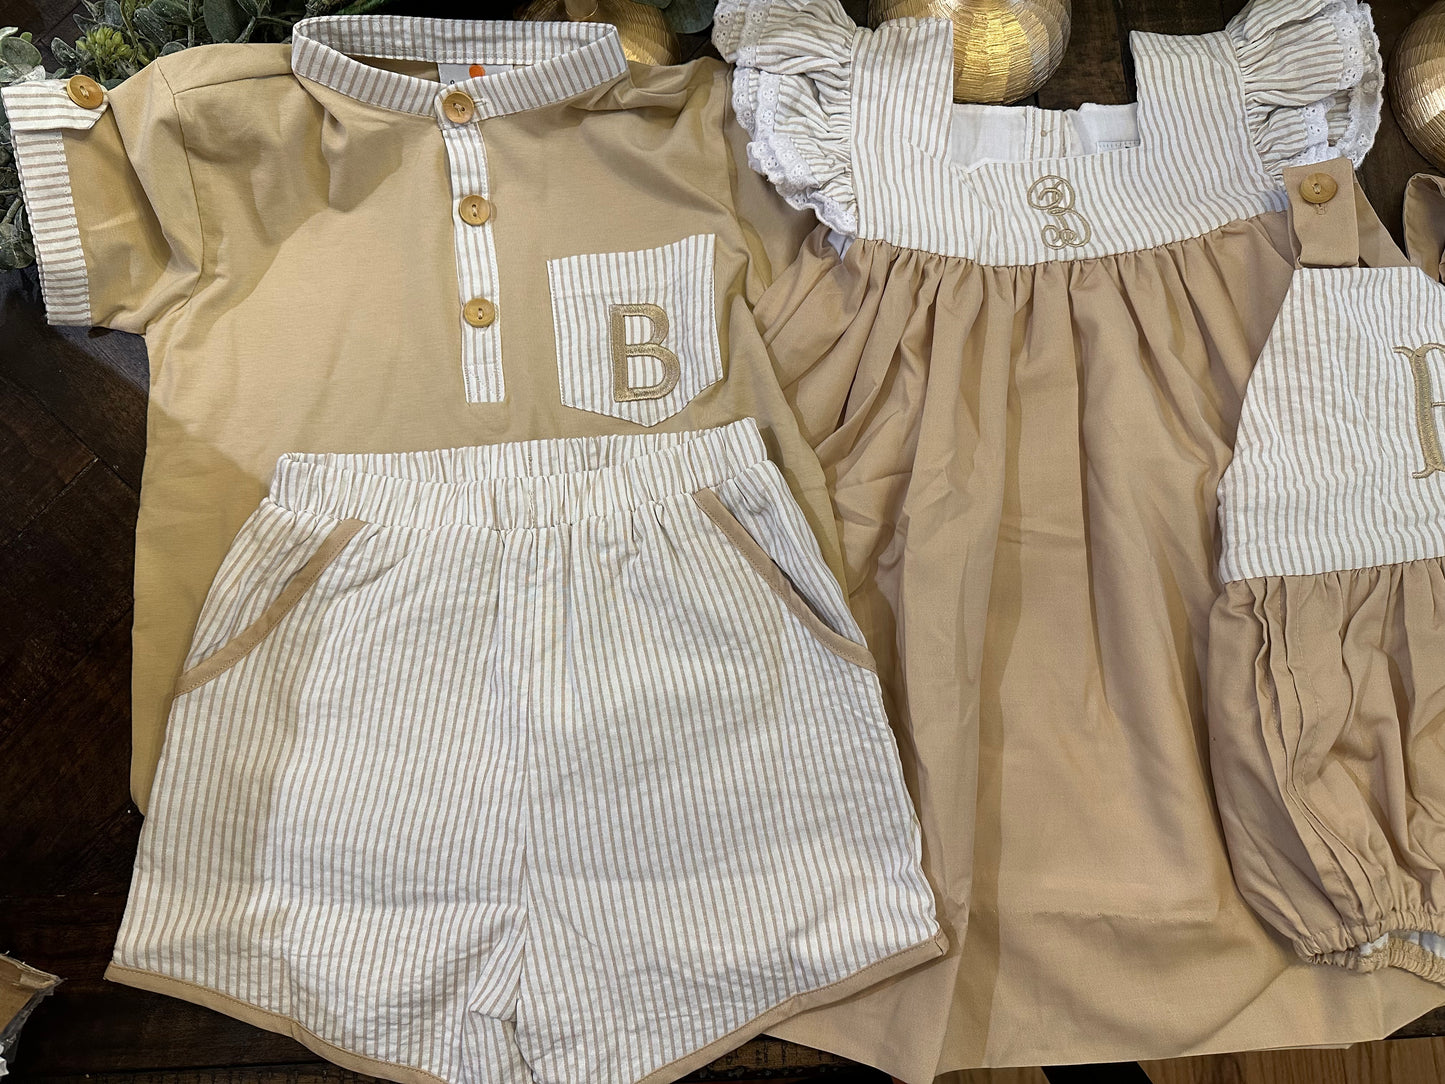 Boy’s Short Set (will be blank, can not personalize)